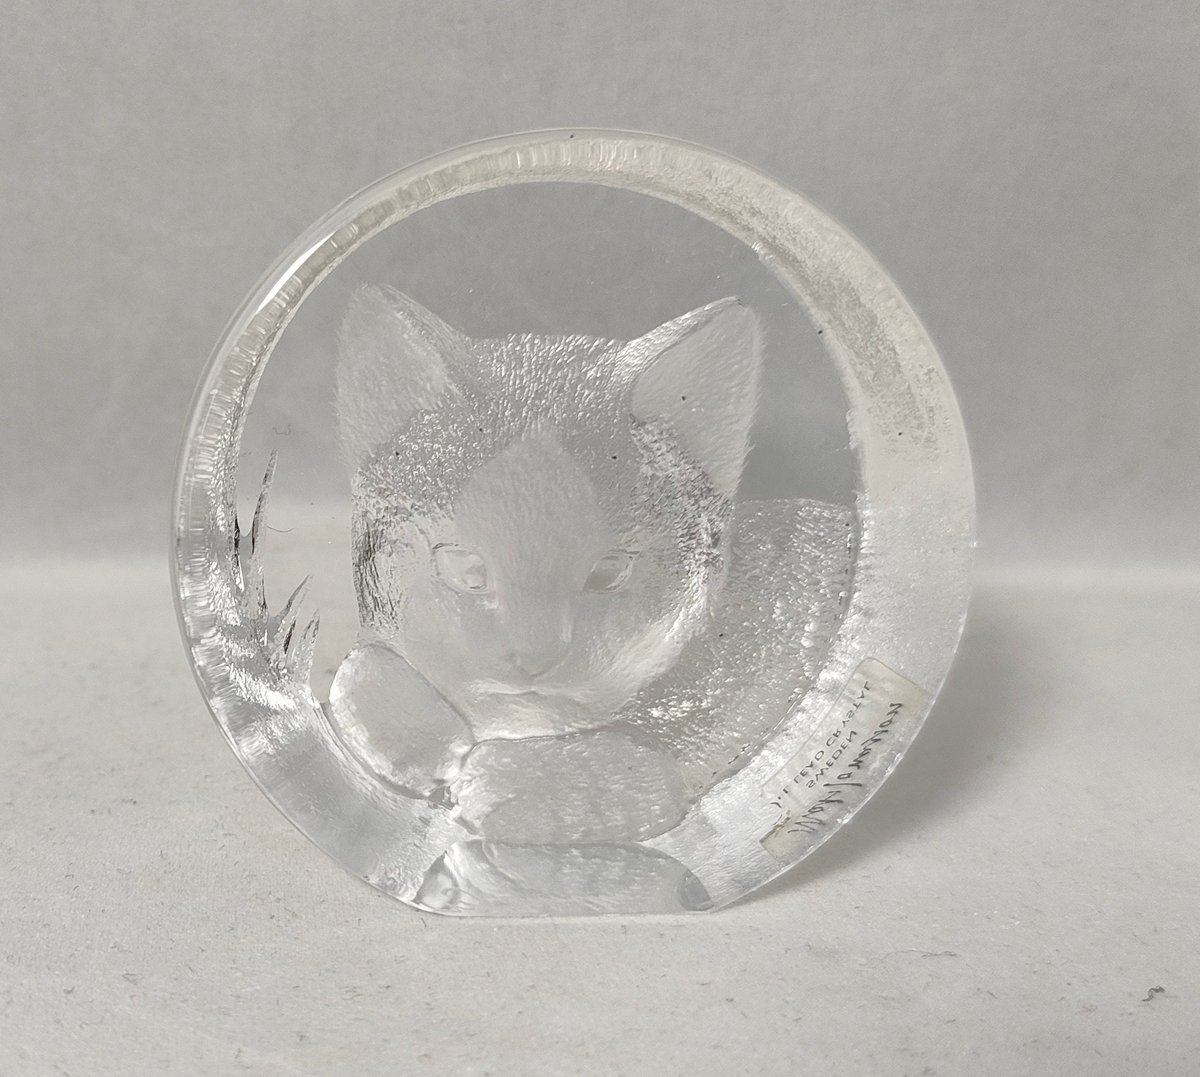 Excited to share the latest addition to my #etsy shop: Collectable Small Mats Jonasson Crystal Intaglio Kitten Paperweight etsy.me/3MUnC8o #intaglioglass #matsjonasson #glasspaperweight #swedishglass #crystal #silverdragonfinds